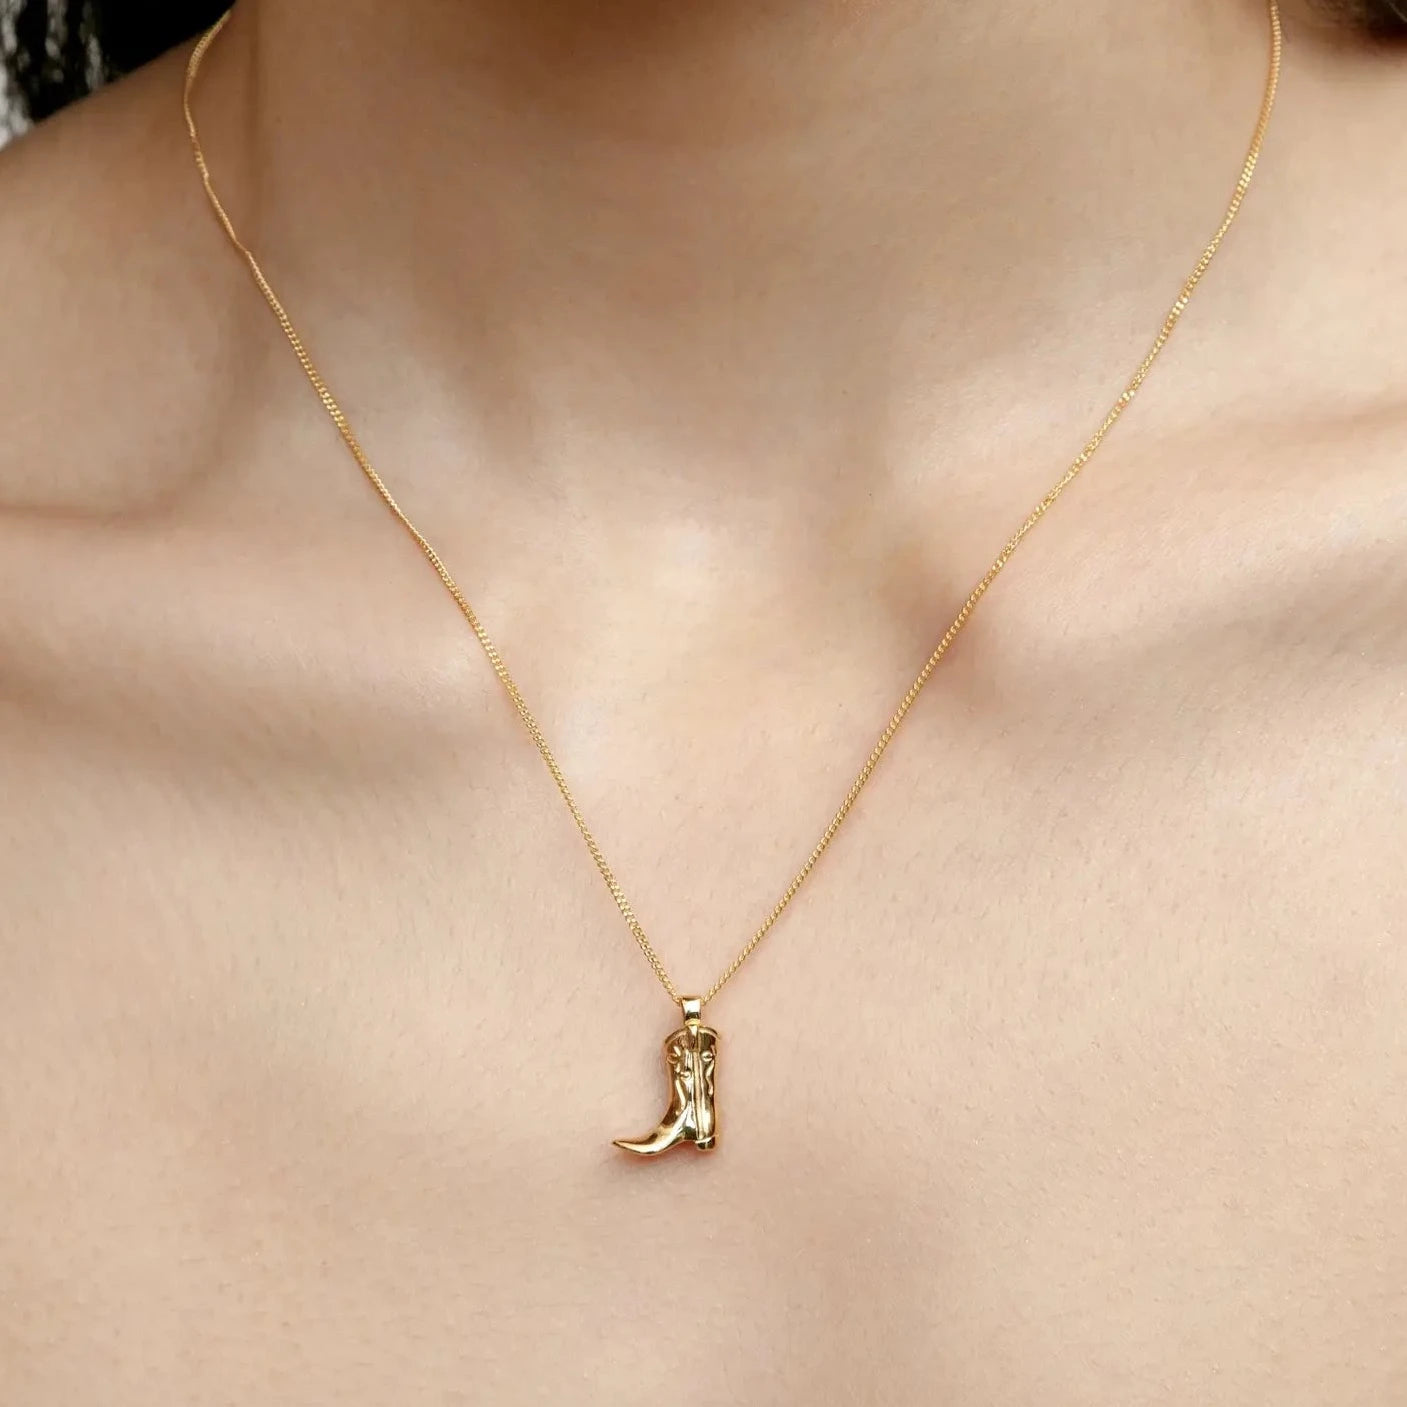 COWBOY BOOT CHARM NECKLACE